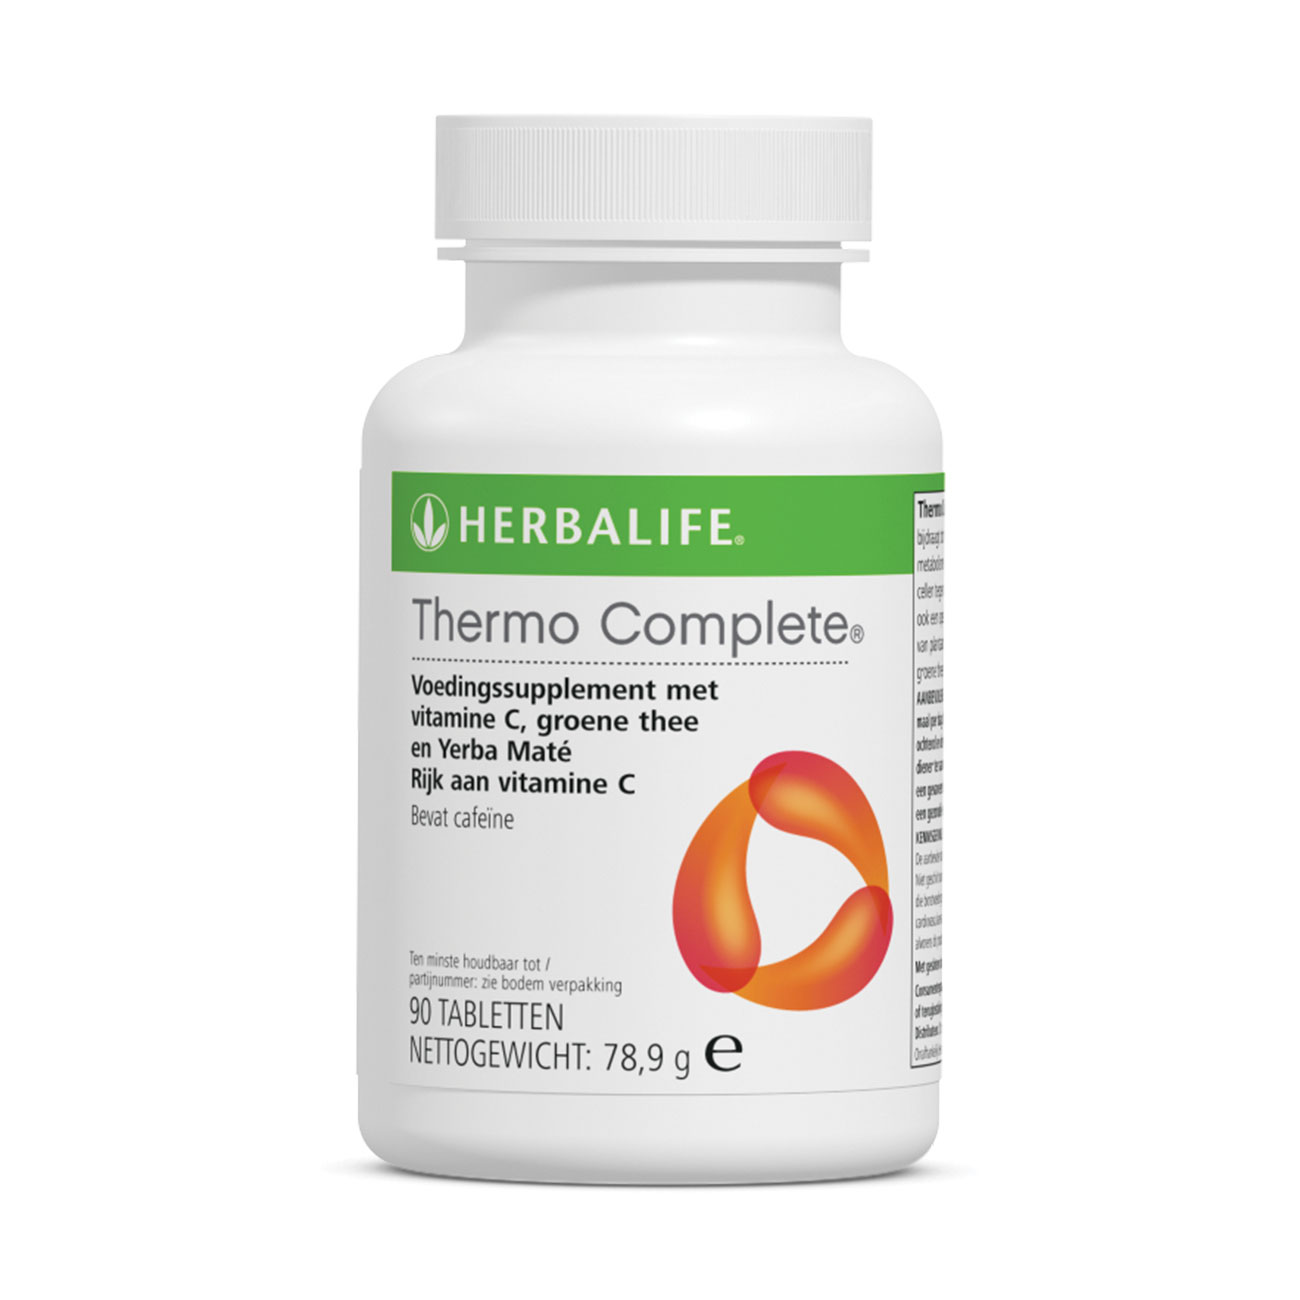 Thermo Complete® voedingssupplement product shot